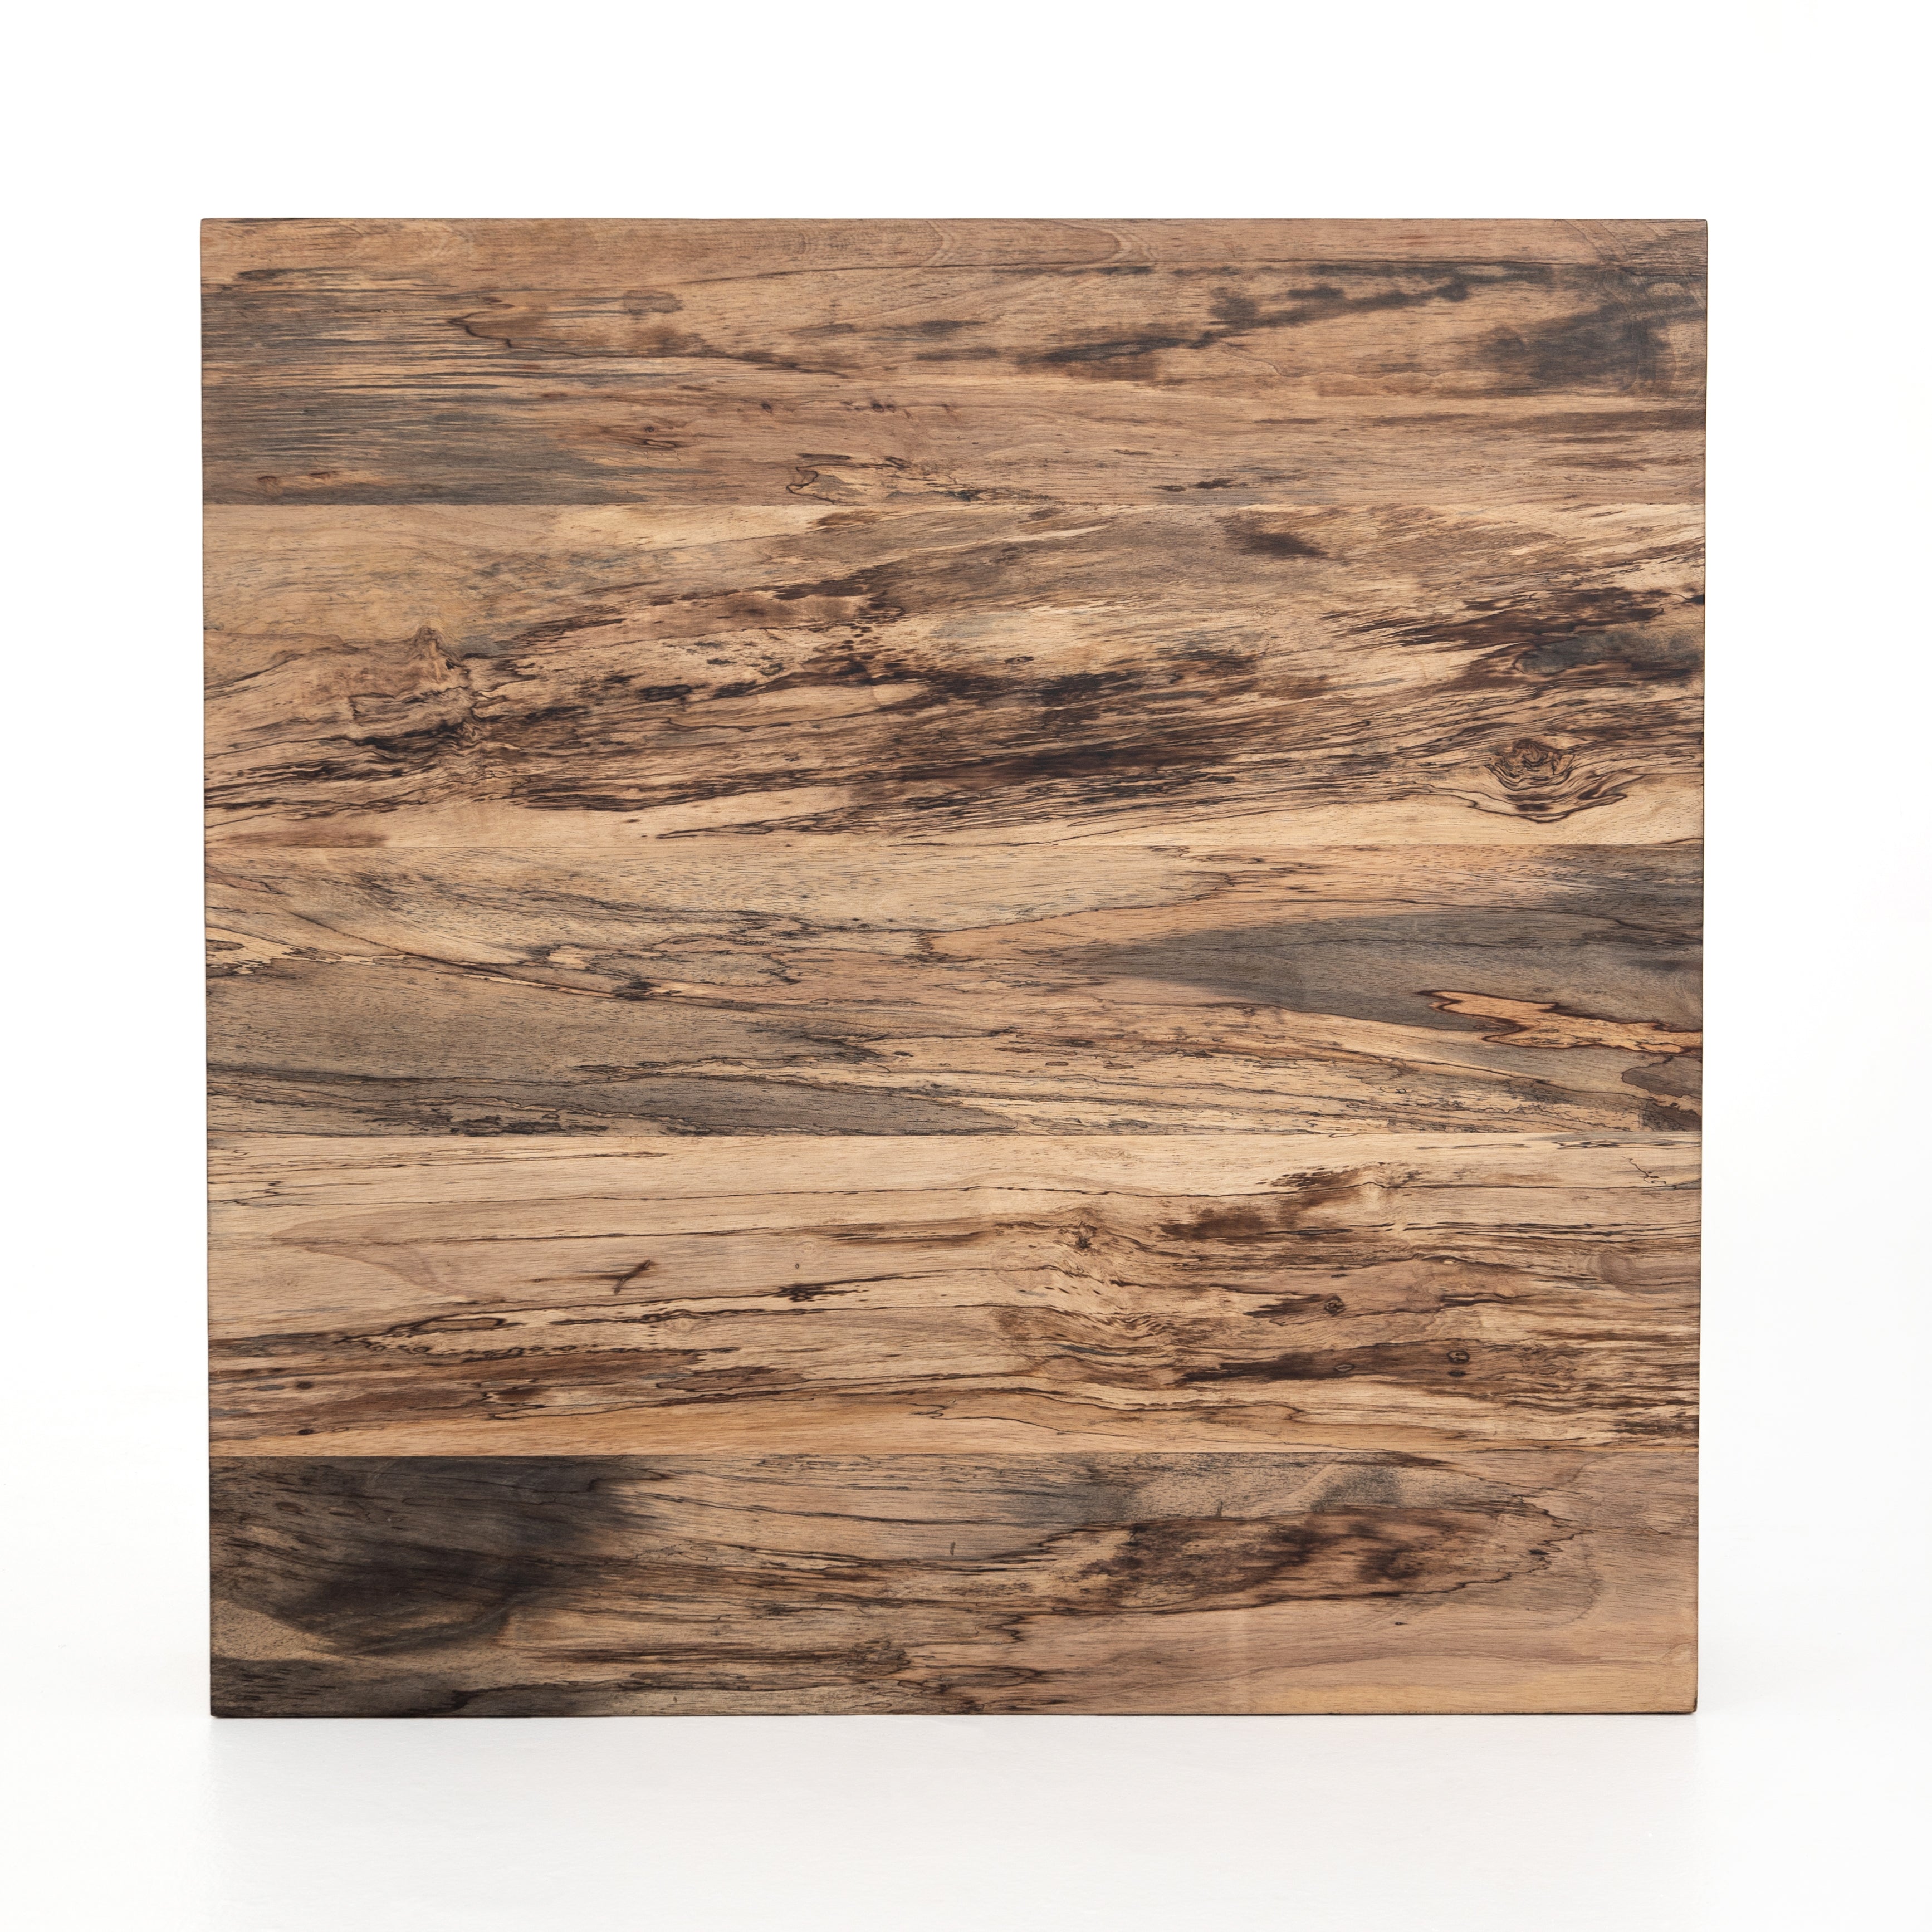 We are obsessed with the spalted pimavera coloring of this Hudson Spalted Primavera Square Coffee Table. A stunning piece to add to any living room or loung area. Reflective of woods' natural character, a slight color variance is possible.  Overall Dimensions: 40"w x 40"d x 15"h Materials: Primavera, Iron